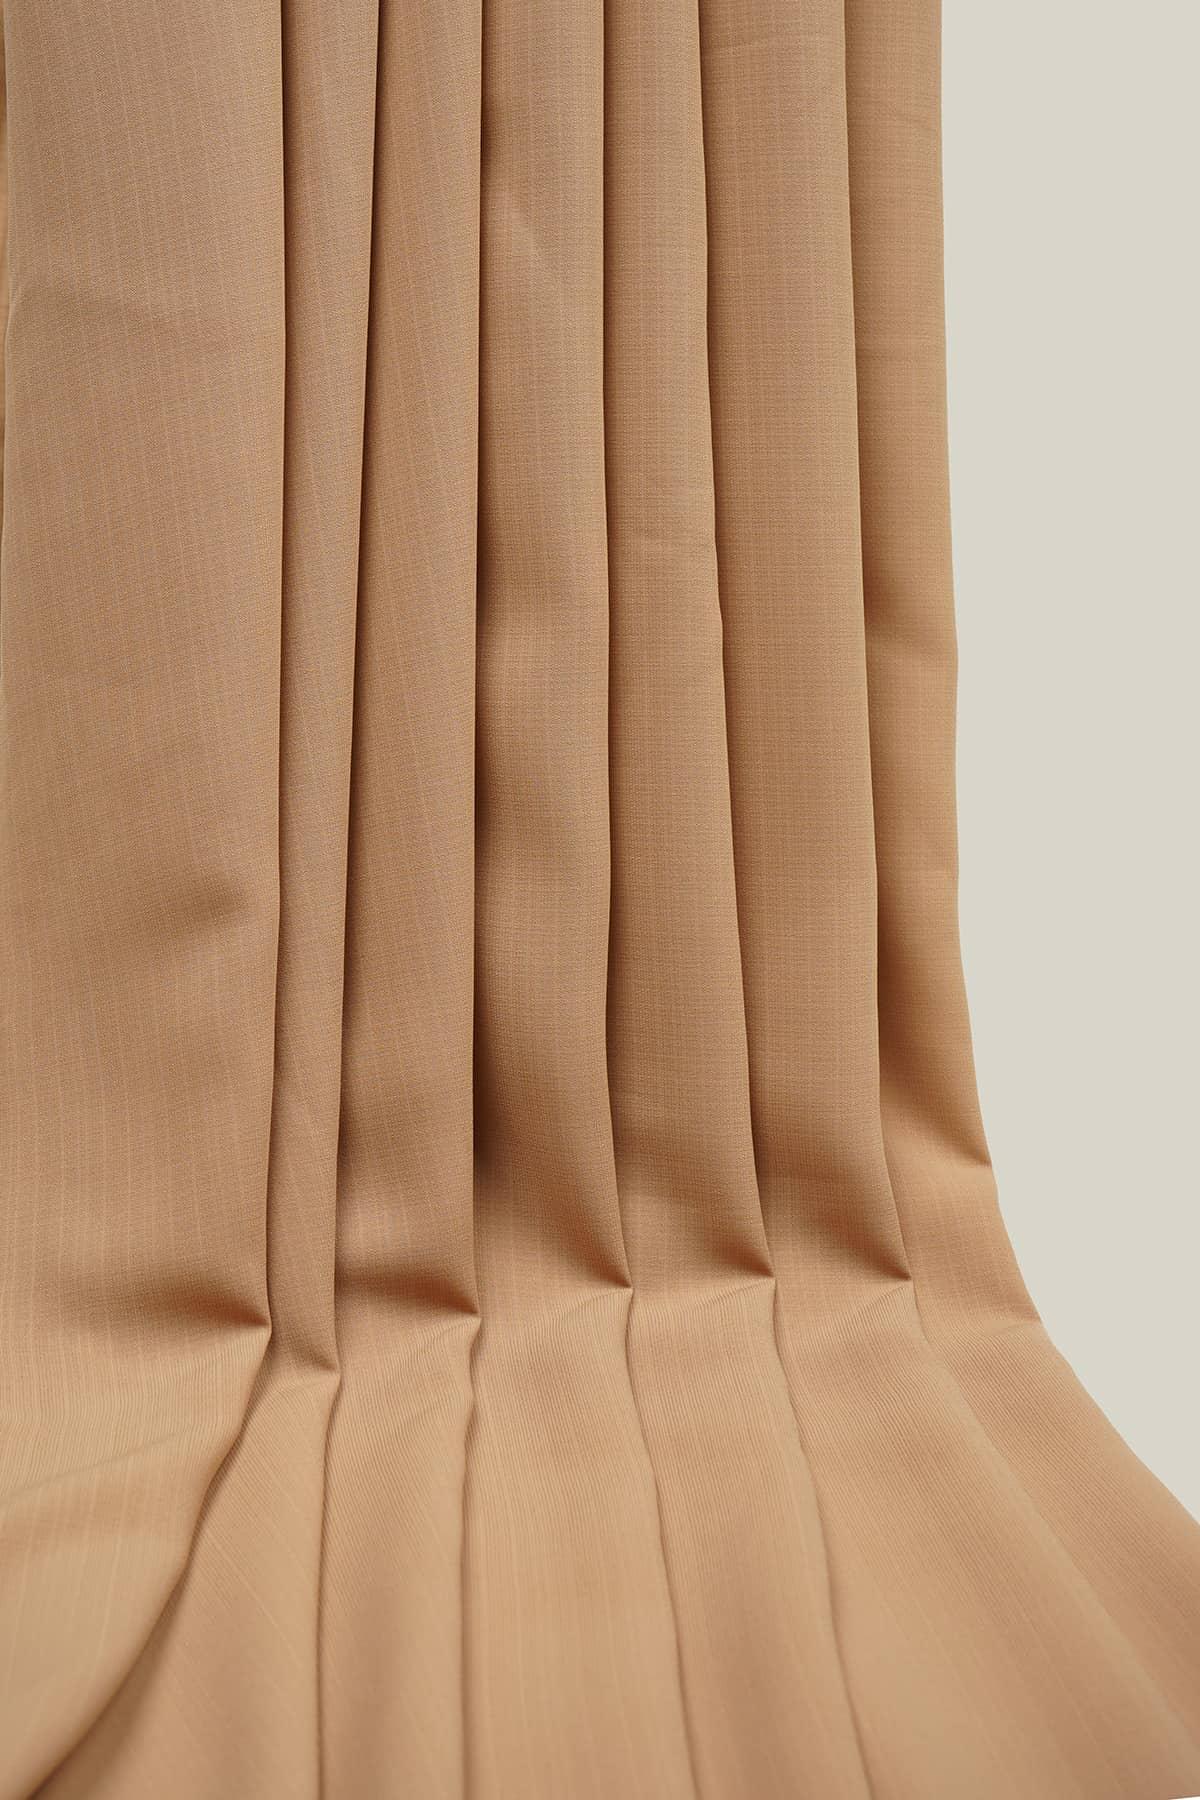 Plain Dyed Betty - saraaha.com - Casual, Casual Wear, Comfy Casual, comfy casuals, Formal Wear, Heavy Weight, Indo Western, Kurta, Long Dresses, Men Wear, Men's wear collection, Multiple Color Variety, One Pieces, Plain Dyed, Polyester, Shirt, Suits, western, Western Dresses, Women Wear